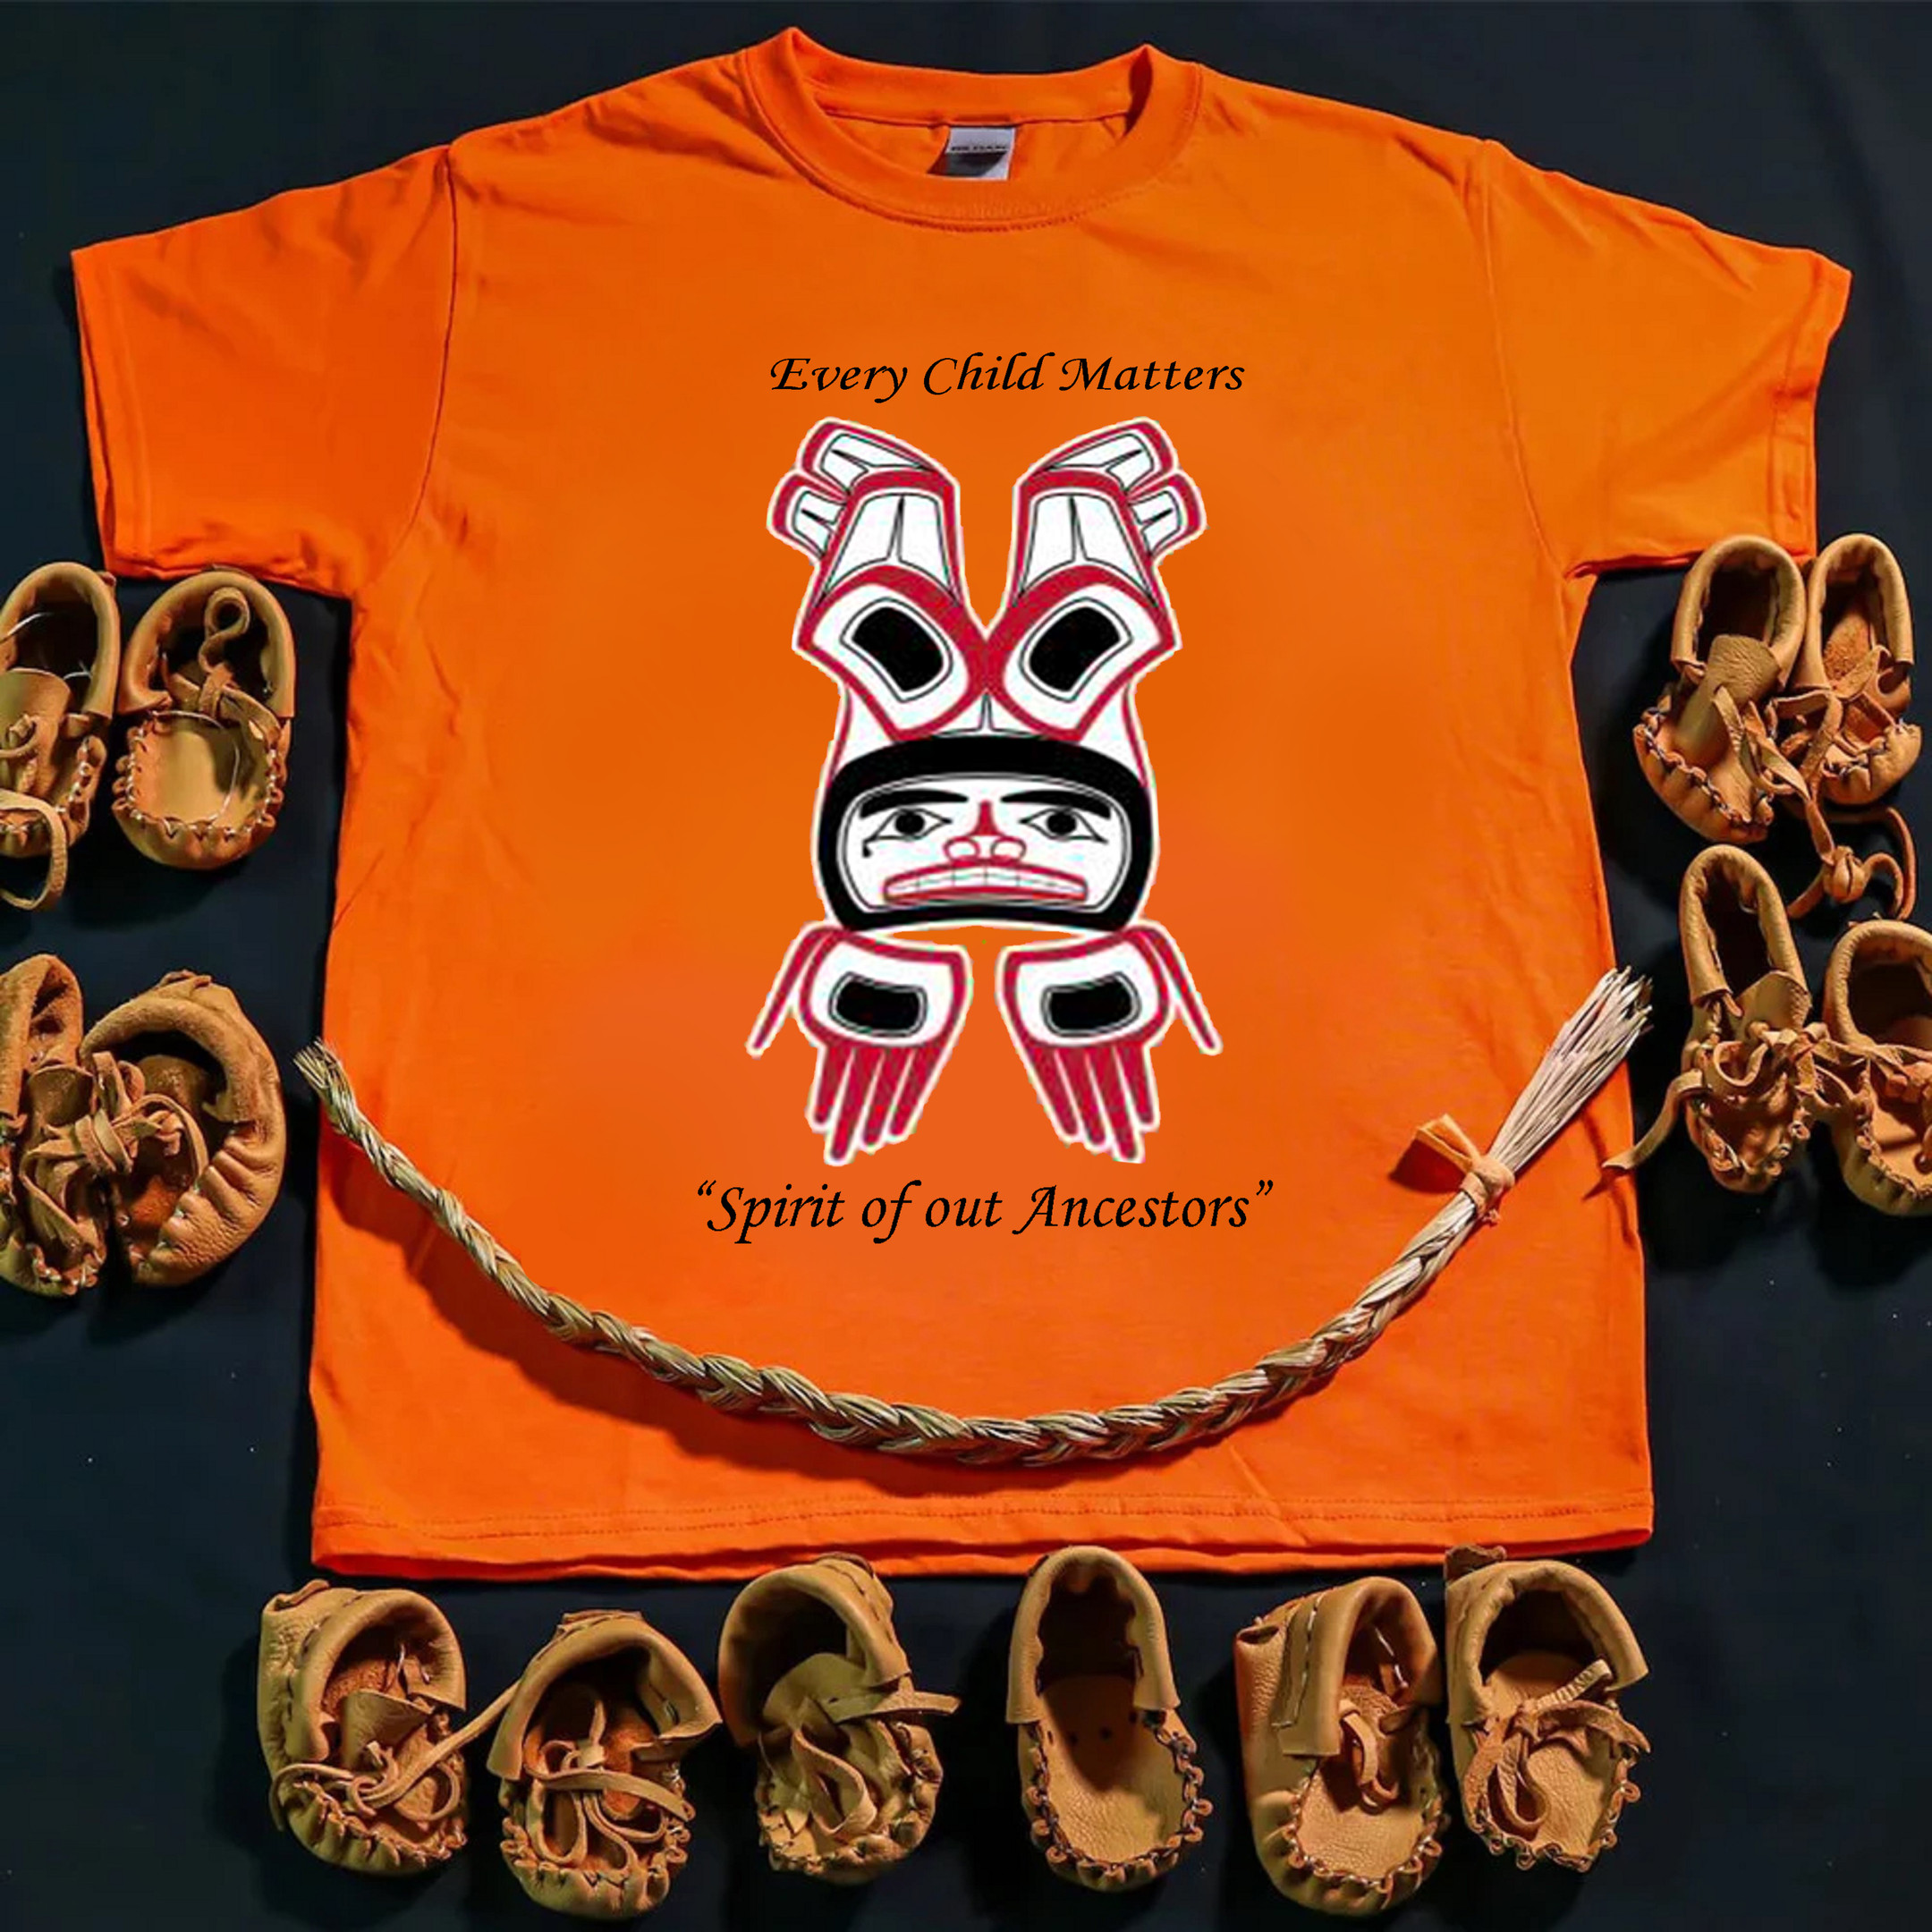 Every Child Matters Shirt Every Child Matters Spirit Of Out Ancestors T-Shirt Clothing